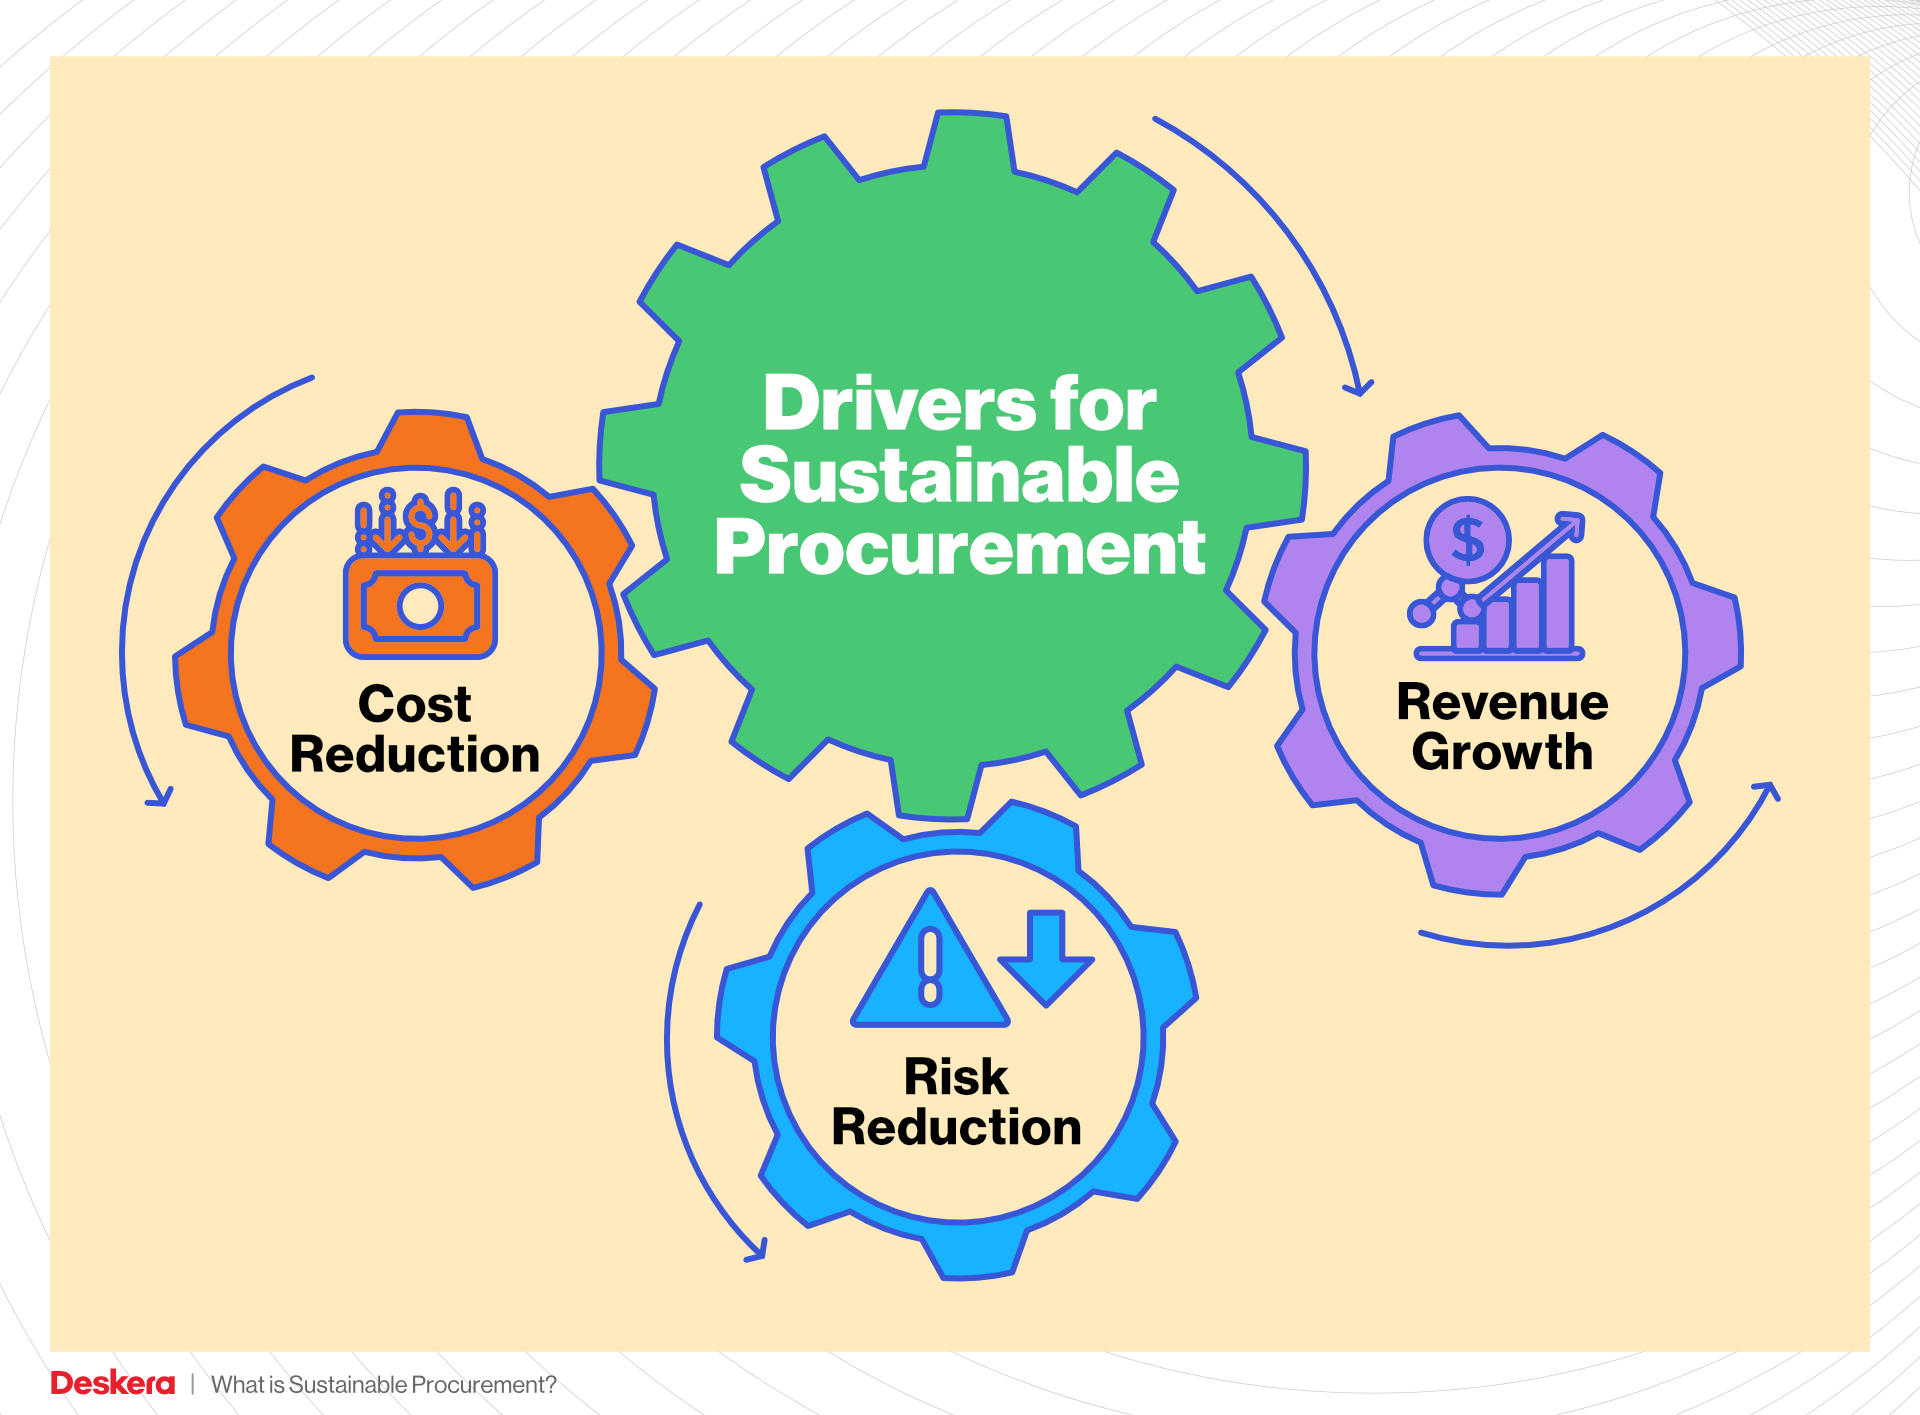 Drivers for Sustainable Procurement